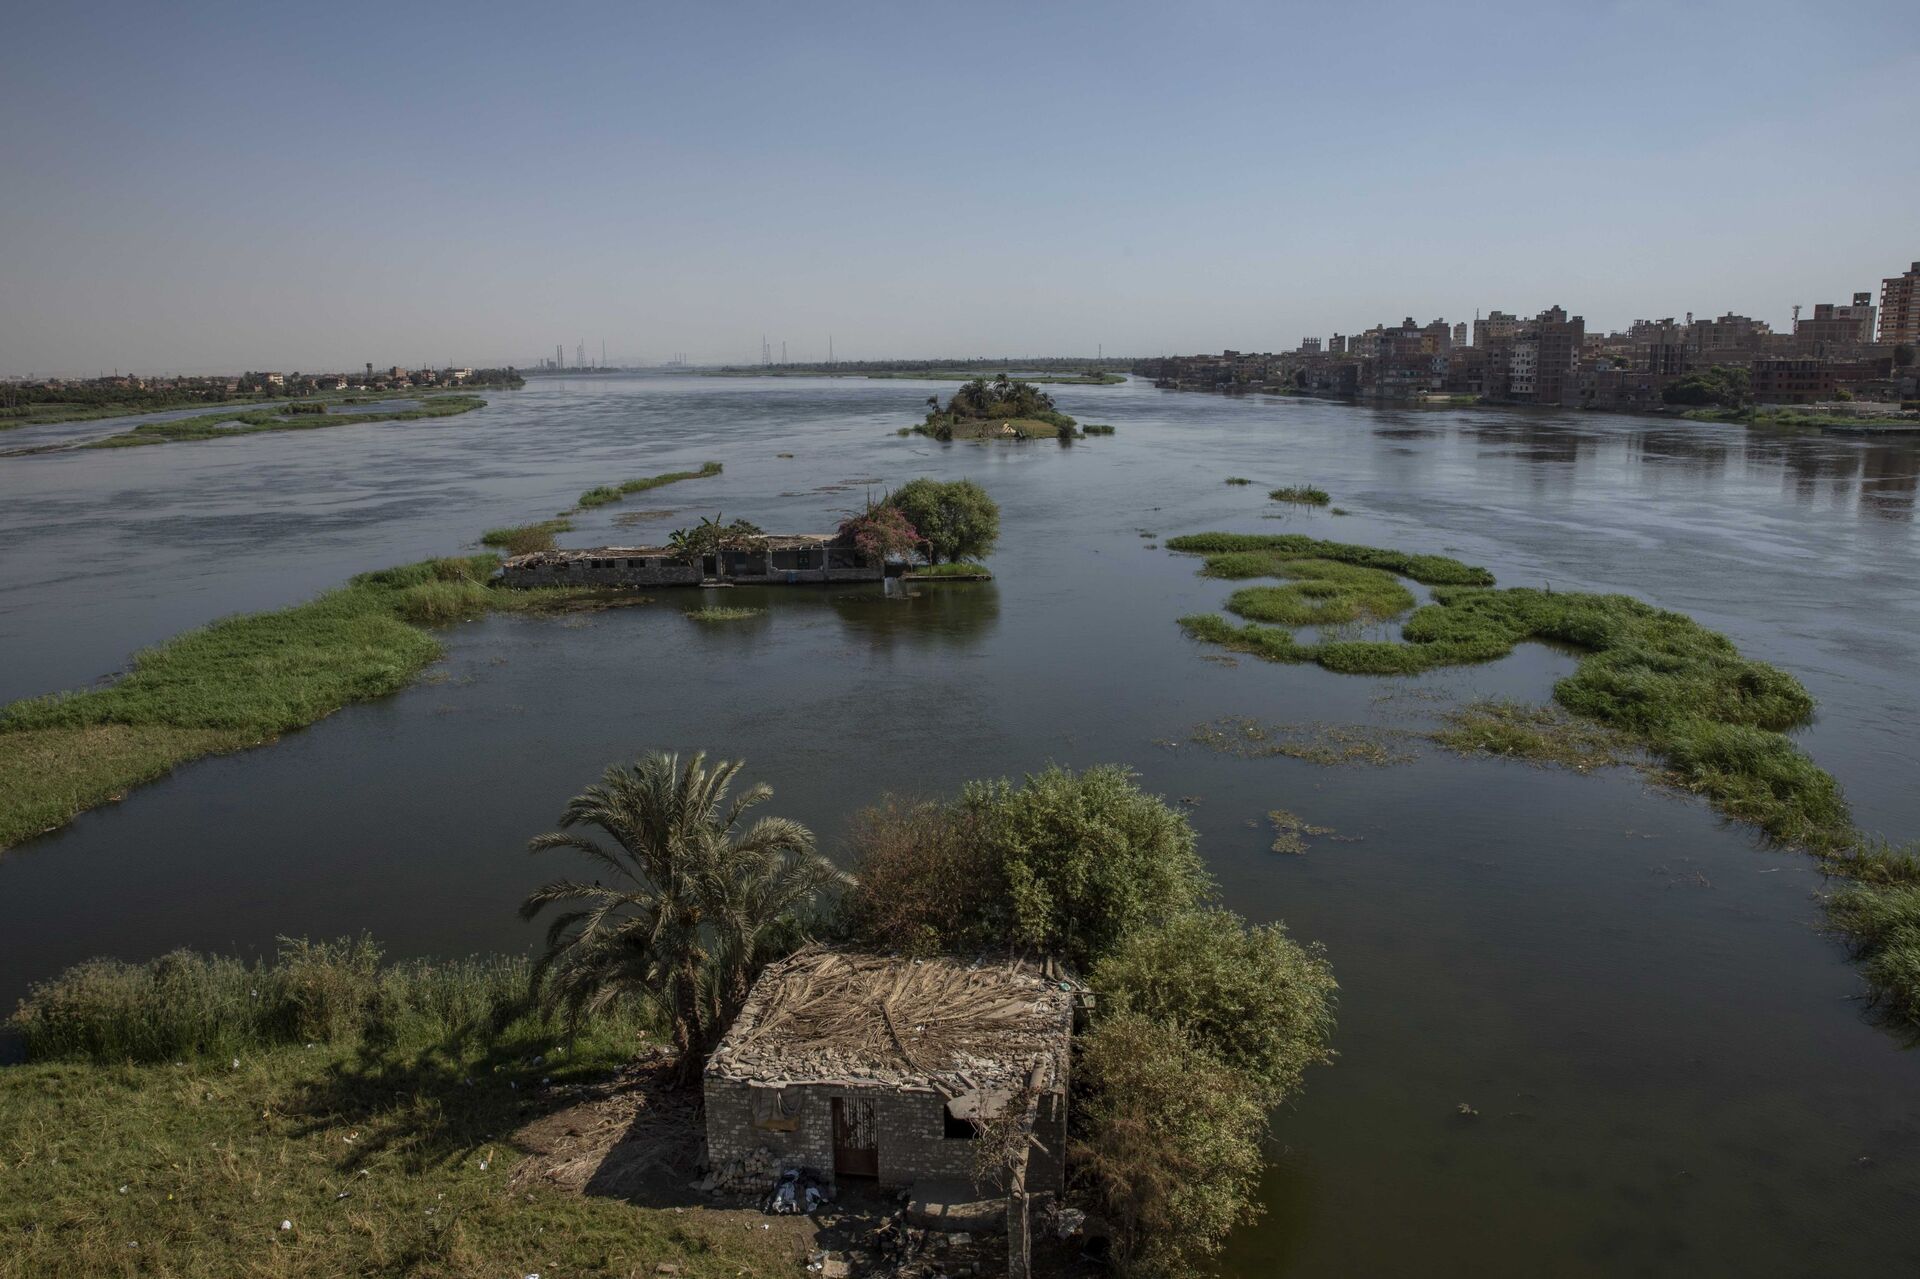 The River Nile as it passes through Beni Suef, Egypt. The Egyptians fear water levels will go down if the Ethiopian dam goes ahead. - Sputnik International, 1920, 01.06.2022